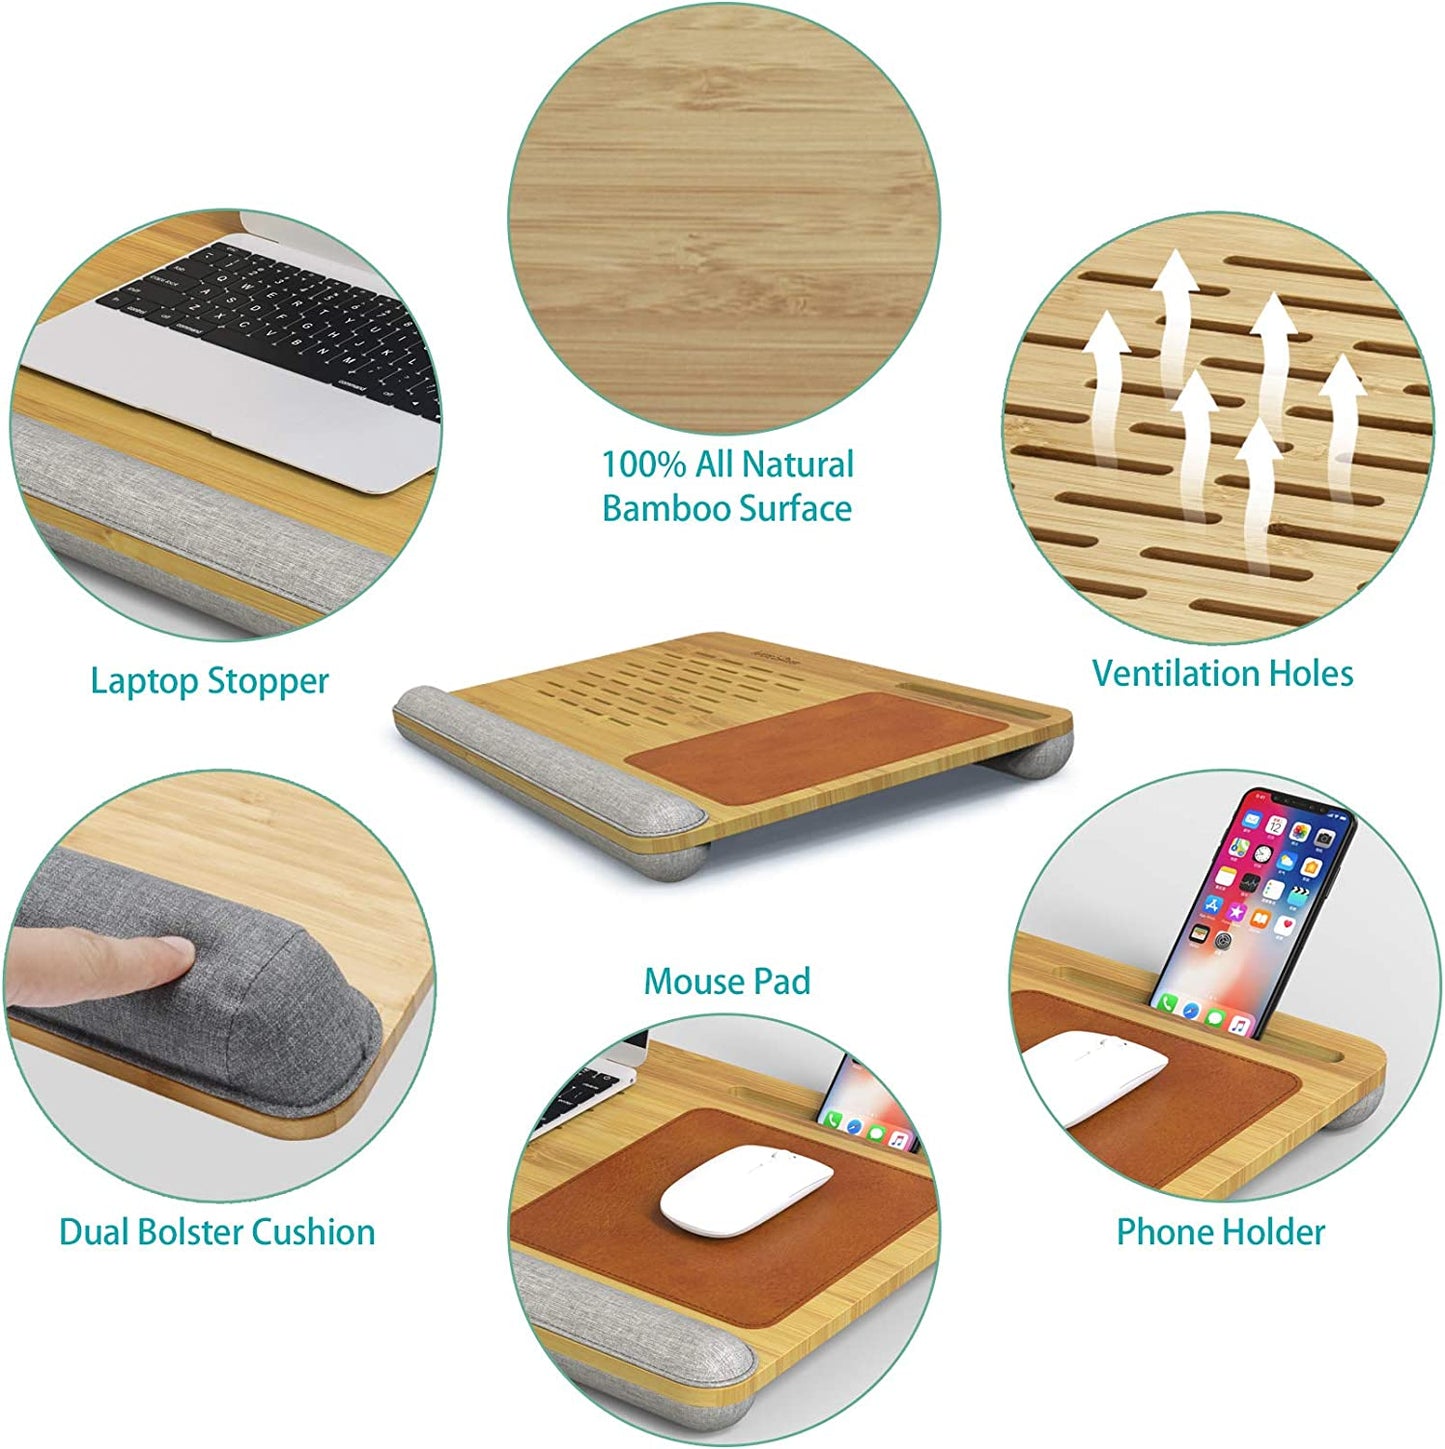 Laptop Desk, Bamboo Lap Desk for Laptop, Laptop Pad with Vent Holes, Built in Mouse Pad & Device Ledge, Pen & Phone Holder -Fits up to 17 Inches Laptop Desks